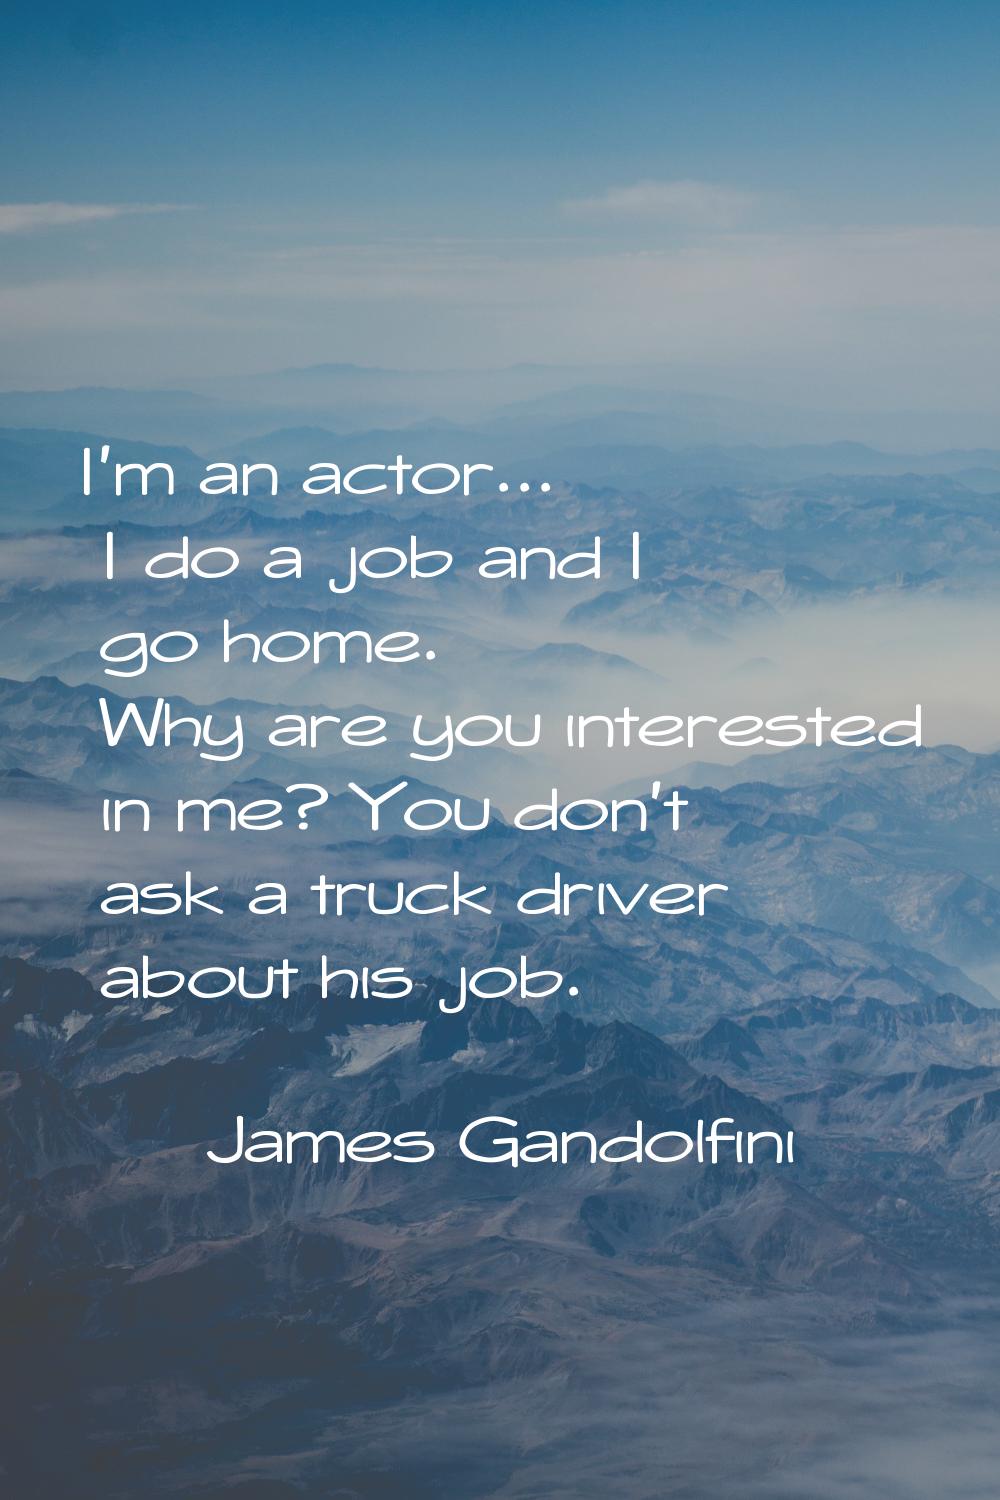 I'm an actor... I do a job and I go home. Why are you interested in me? You don't ask a truck drive